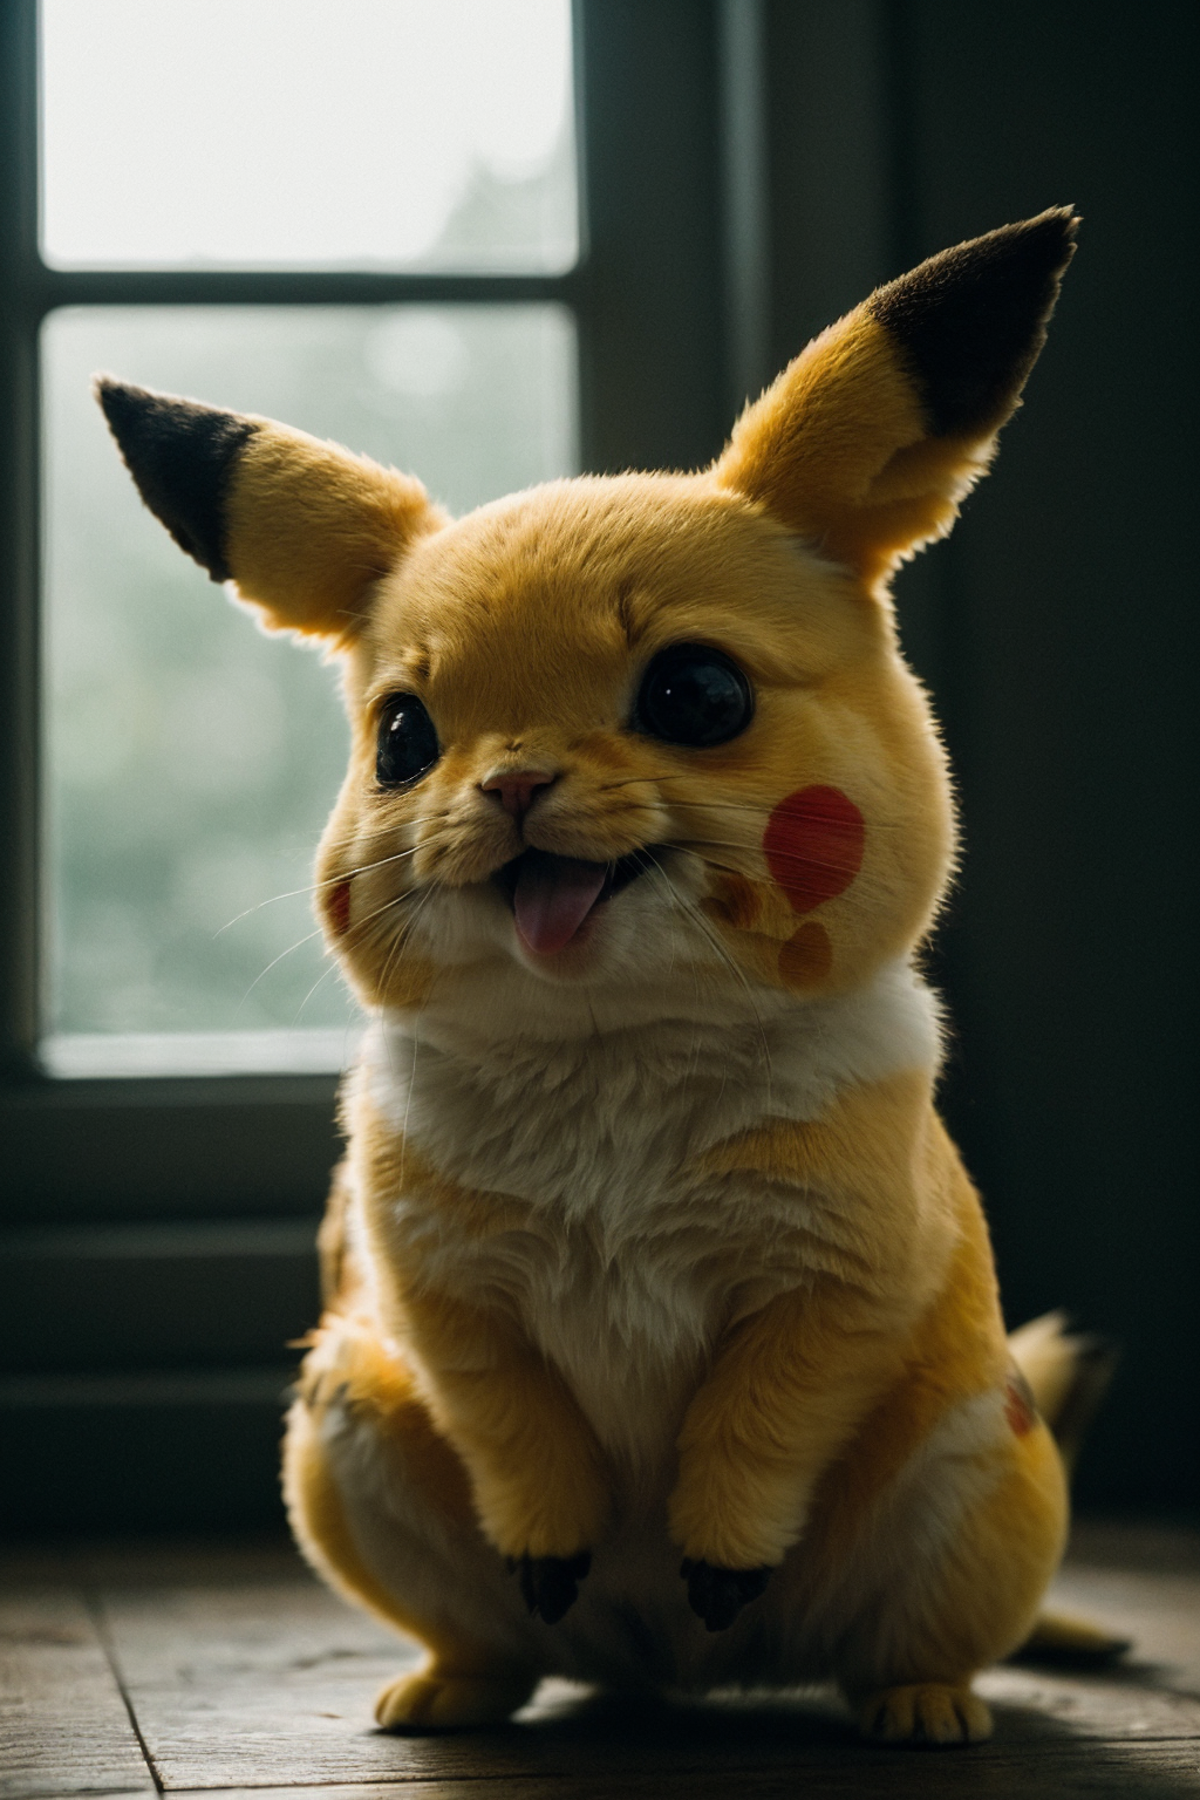 A close-up of a Pikachu plushie with a tongue sticking out.